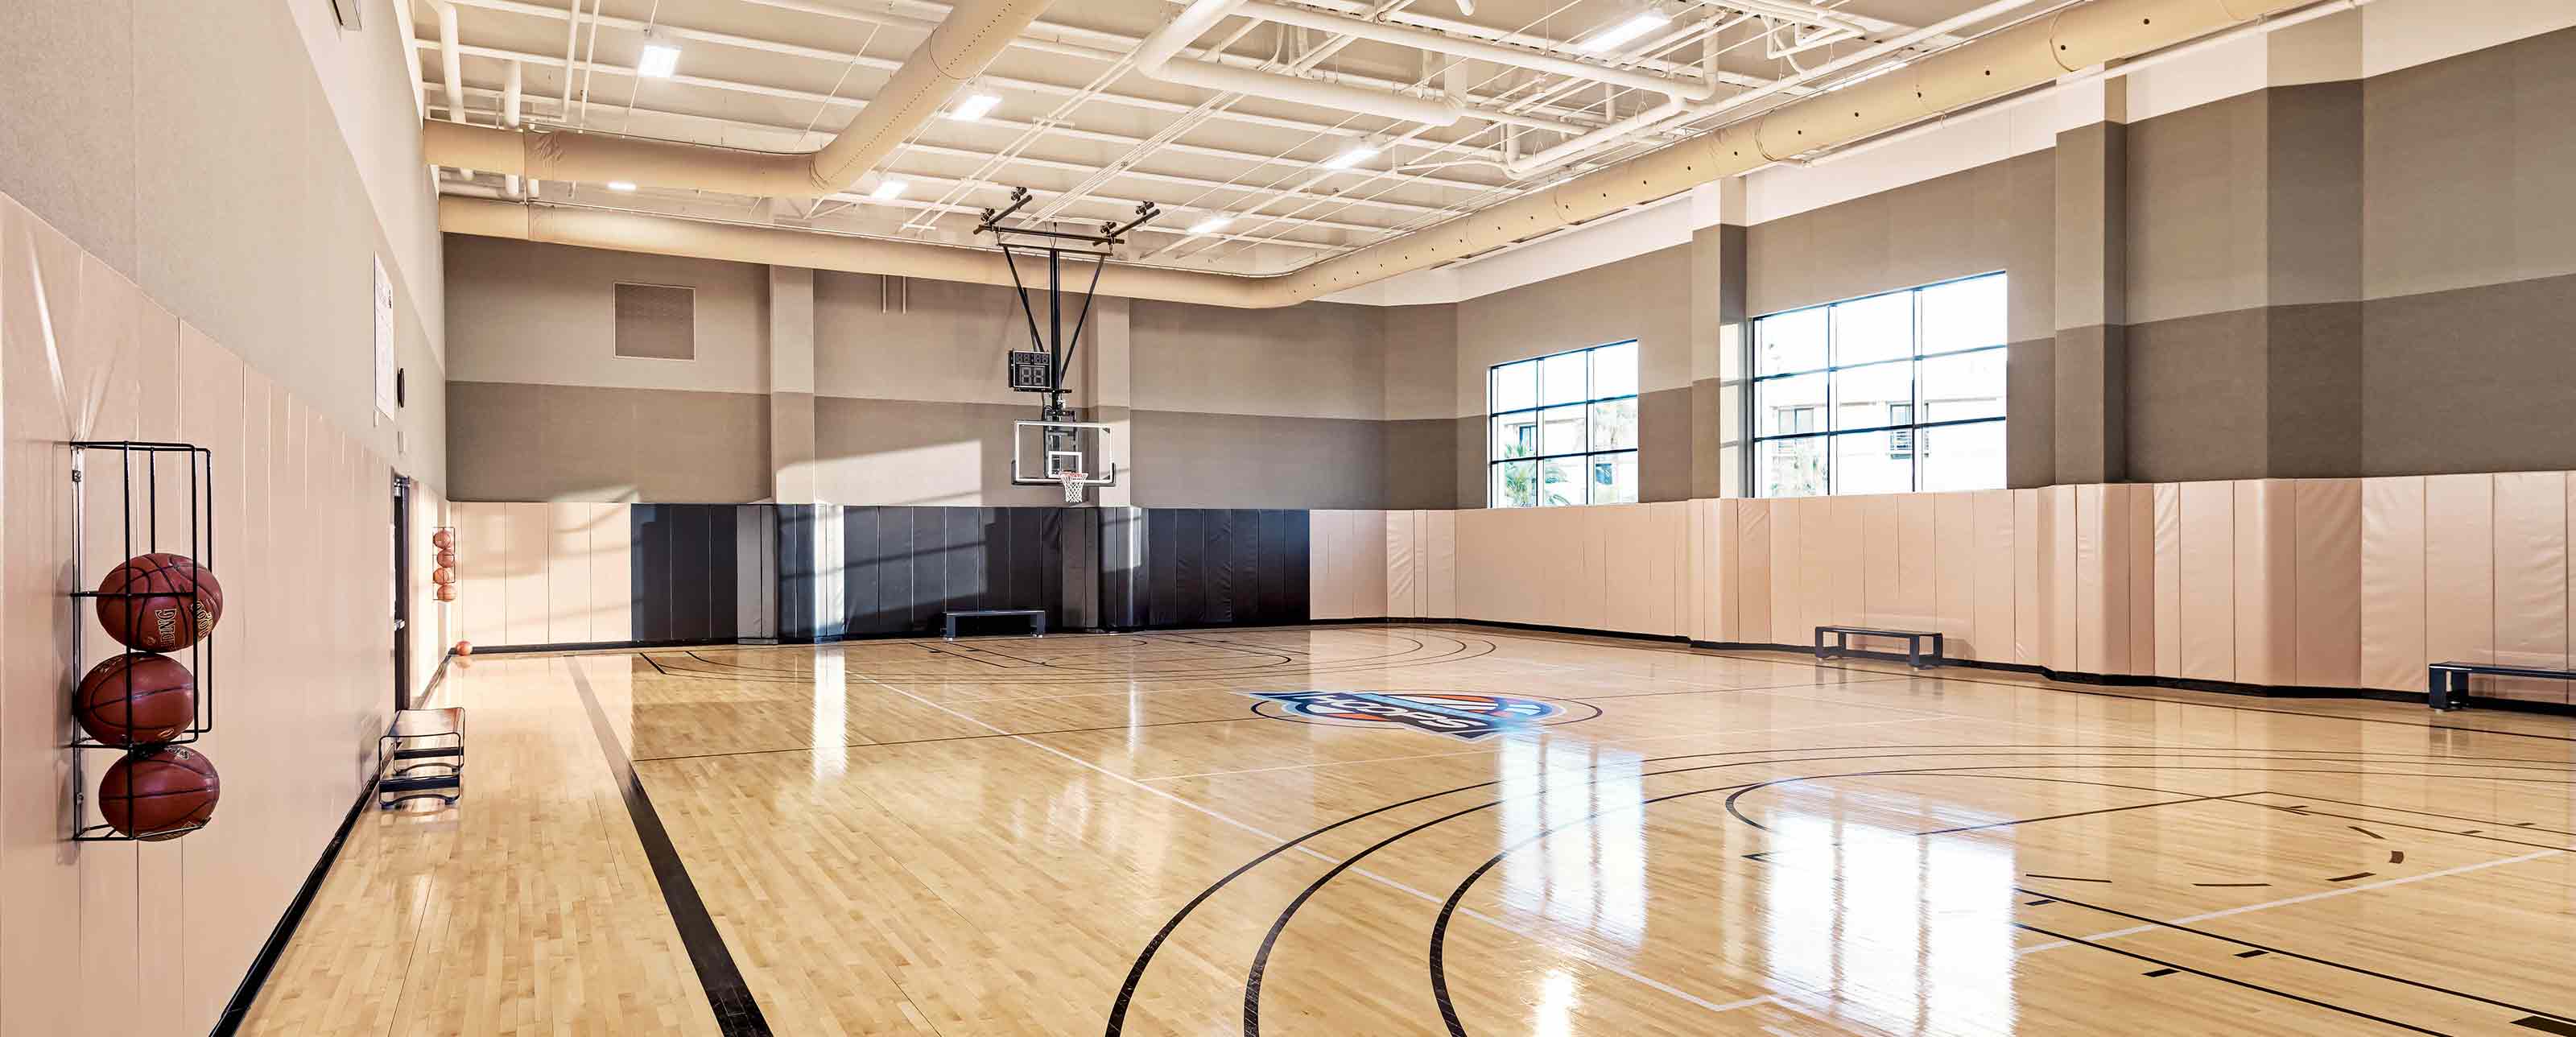 a large gymnasium with basketball courts and basketballs